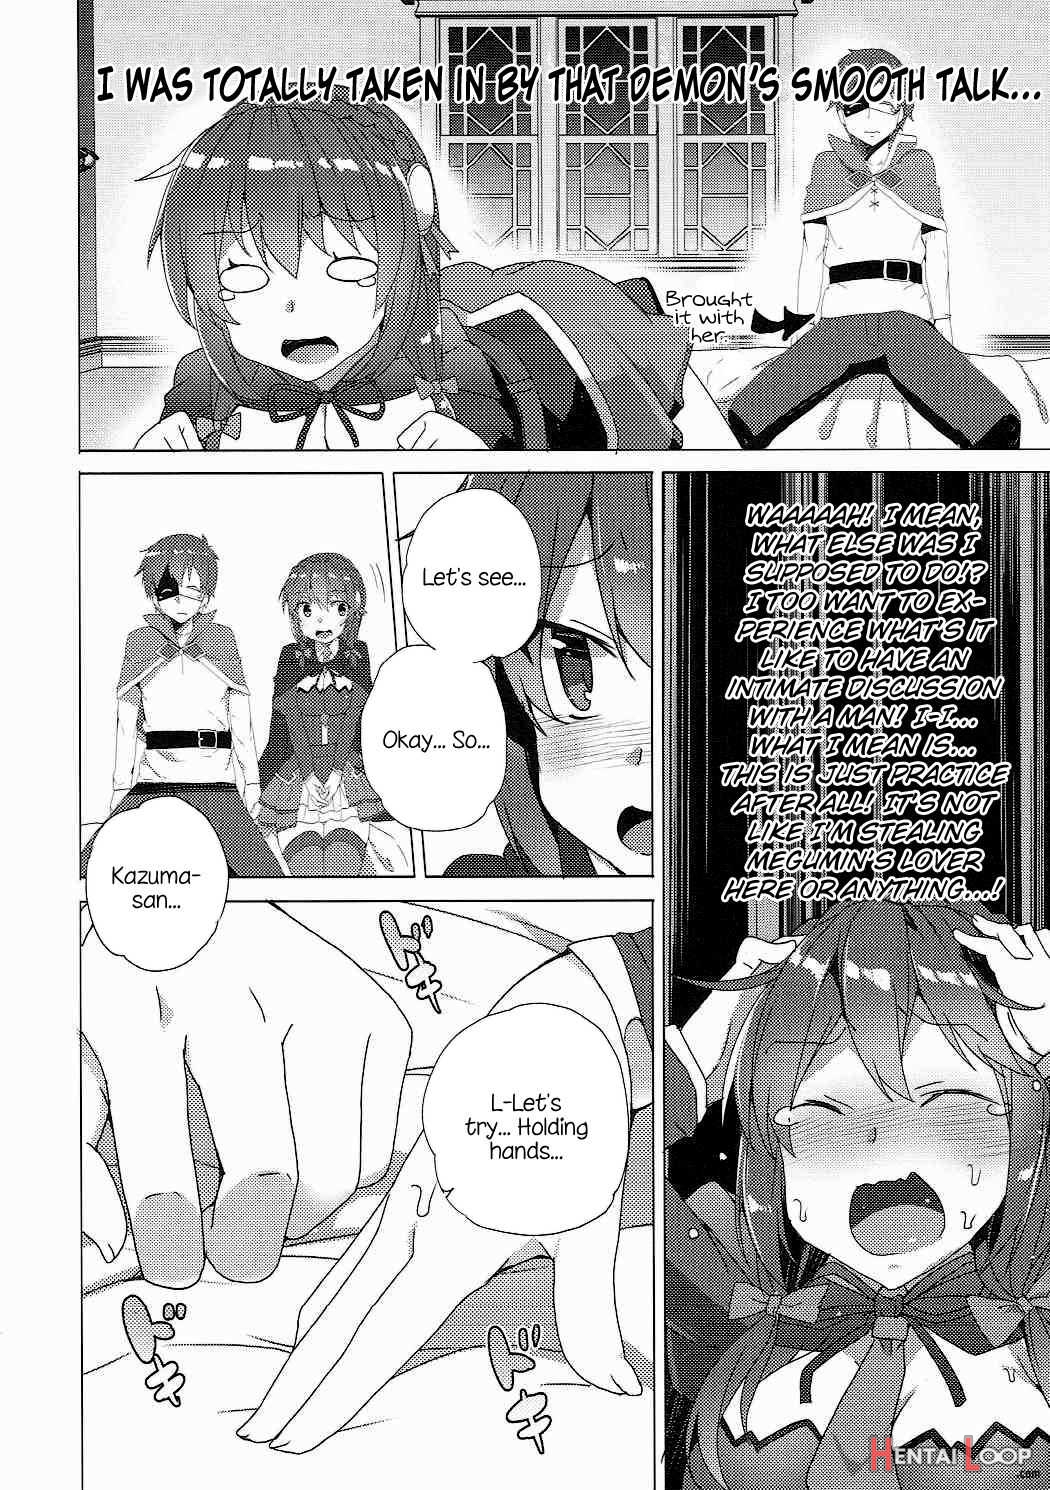 Threesome With These Wonderful Crimson Demon Girls! page 9